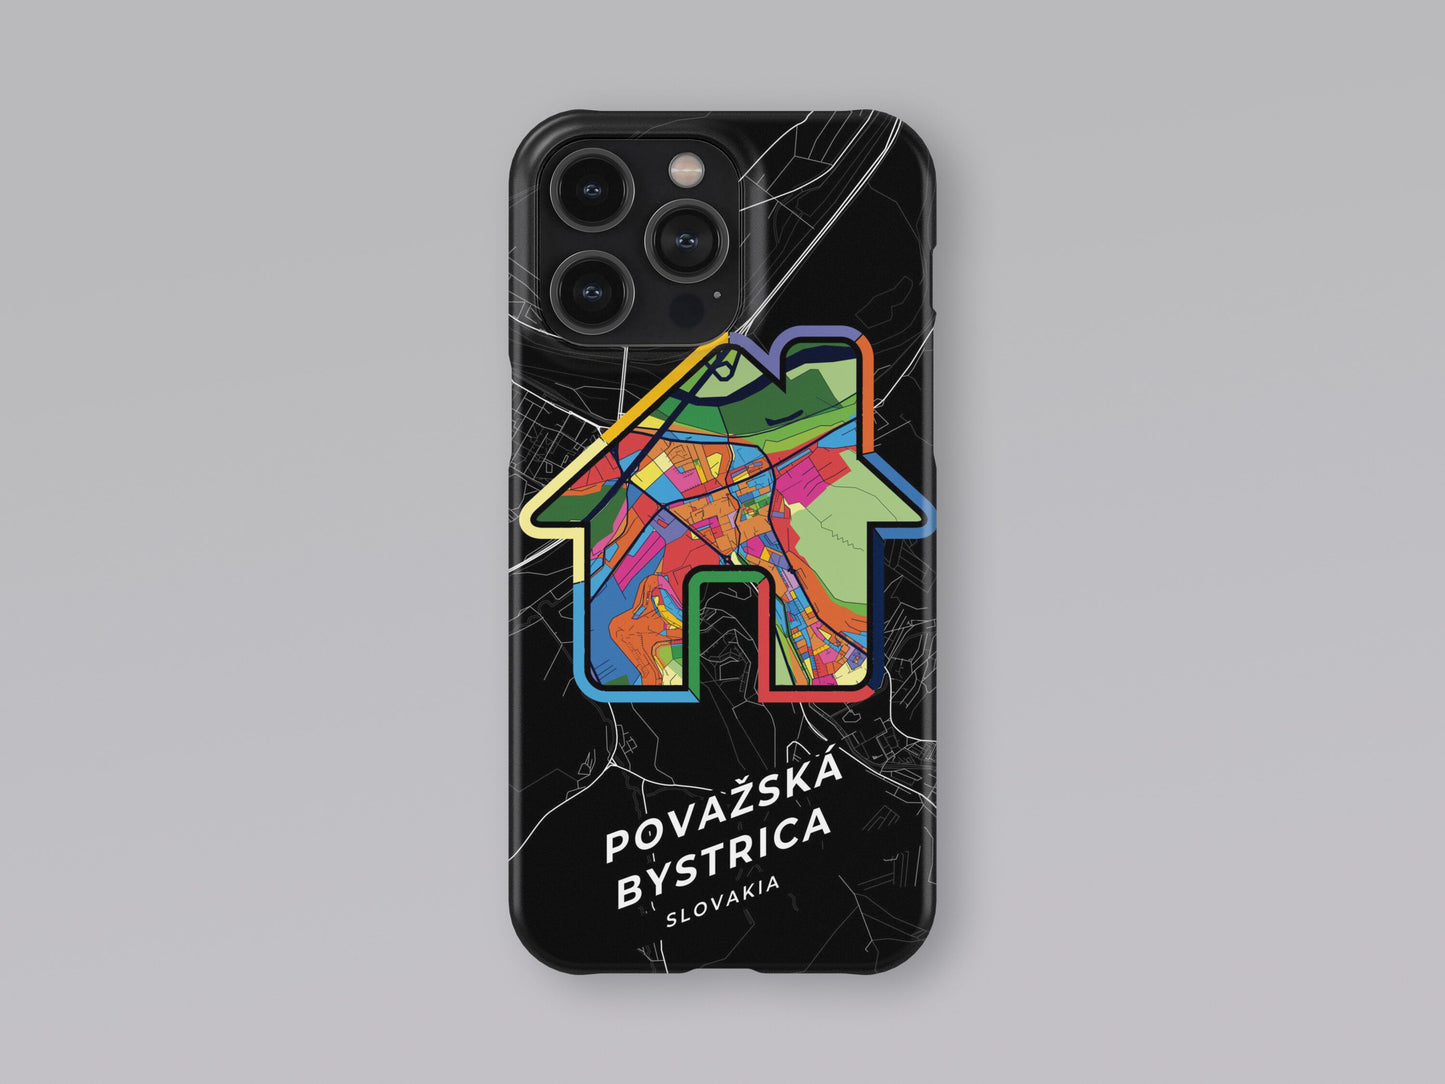 Považská Bystrica Slovakia slim phone case with colorful icon. Birthday, wedding or housewarming gift. Couple match cases. 3